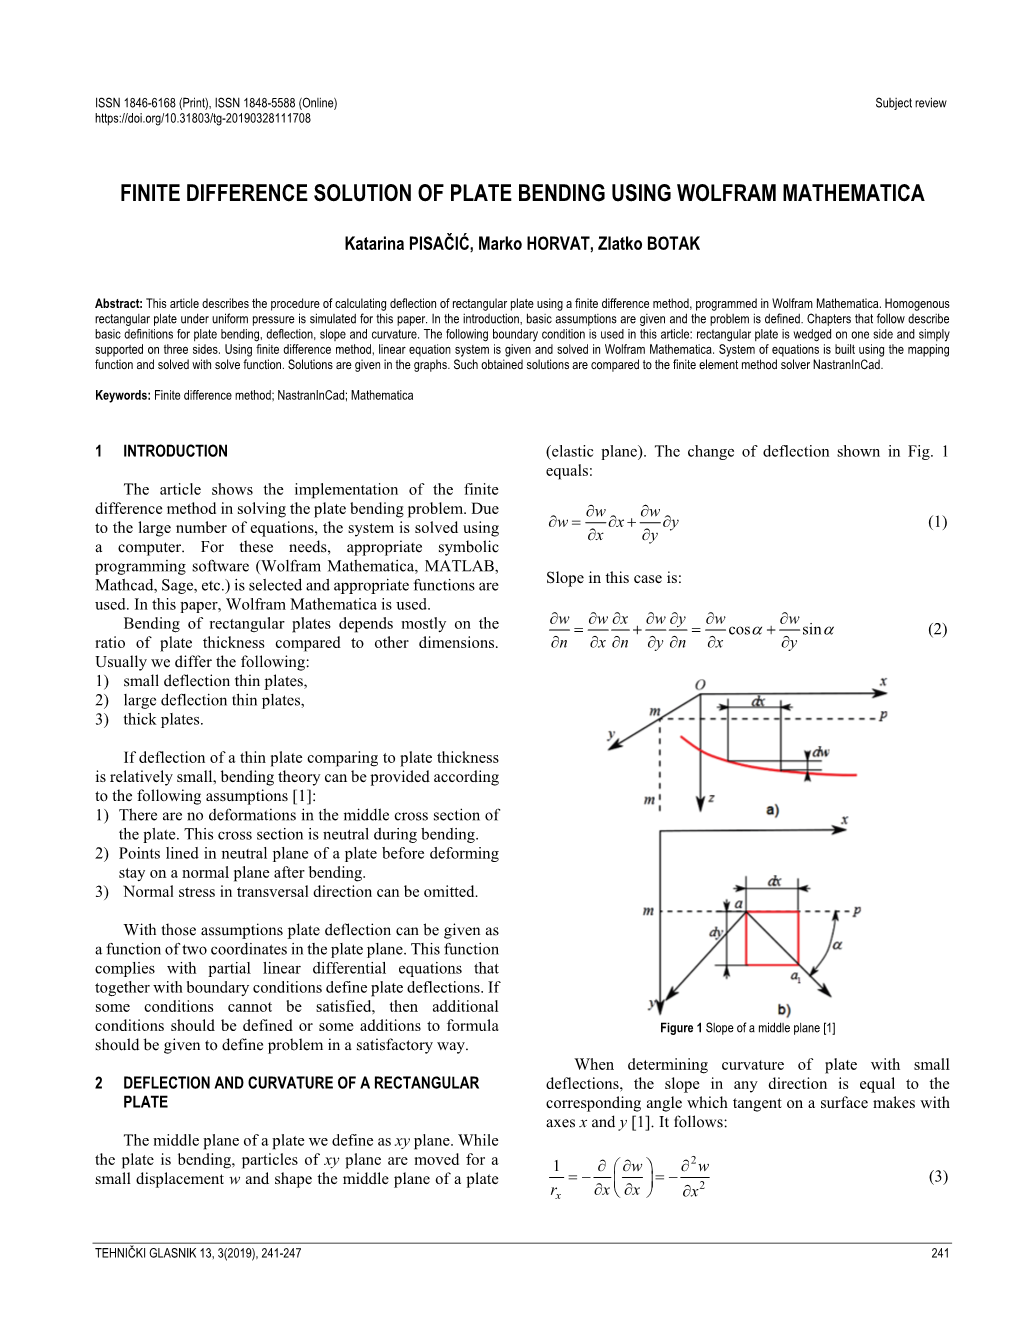 Finite Difference Solution of Plate Bending Using Wolfram Mathematica